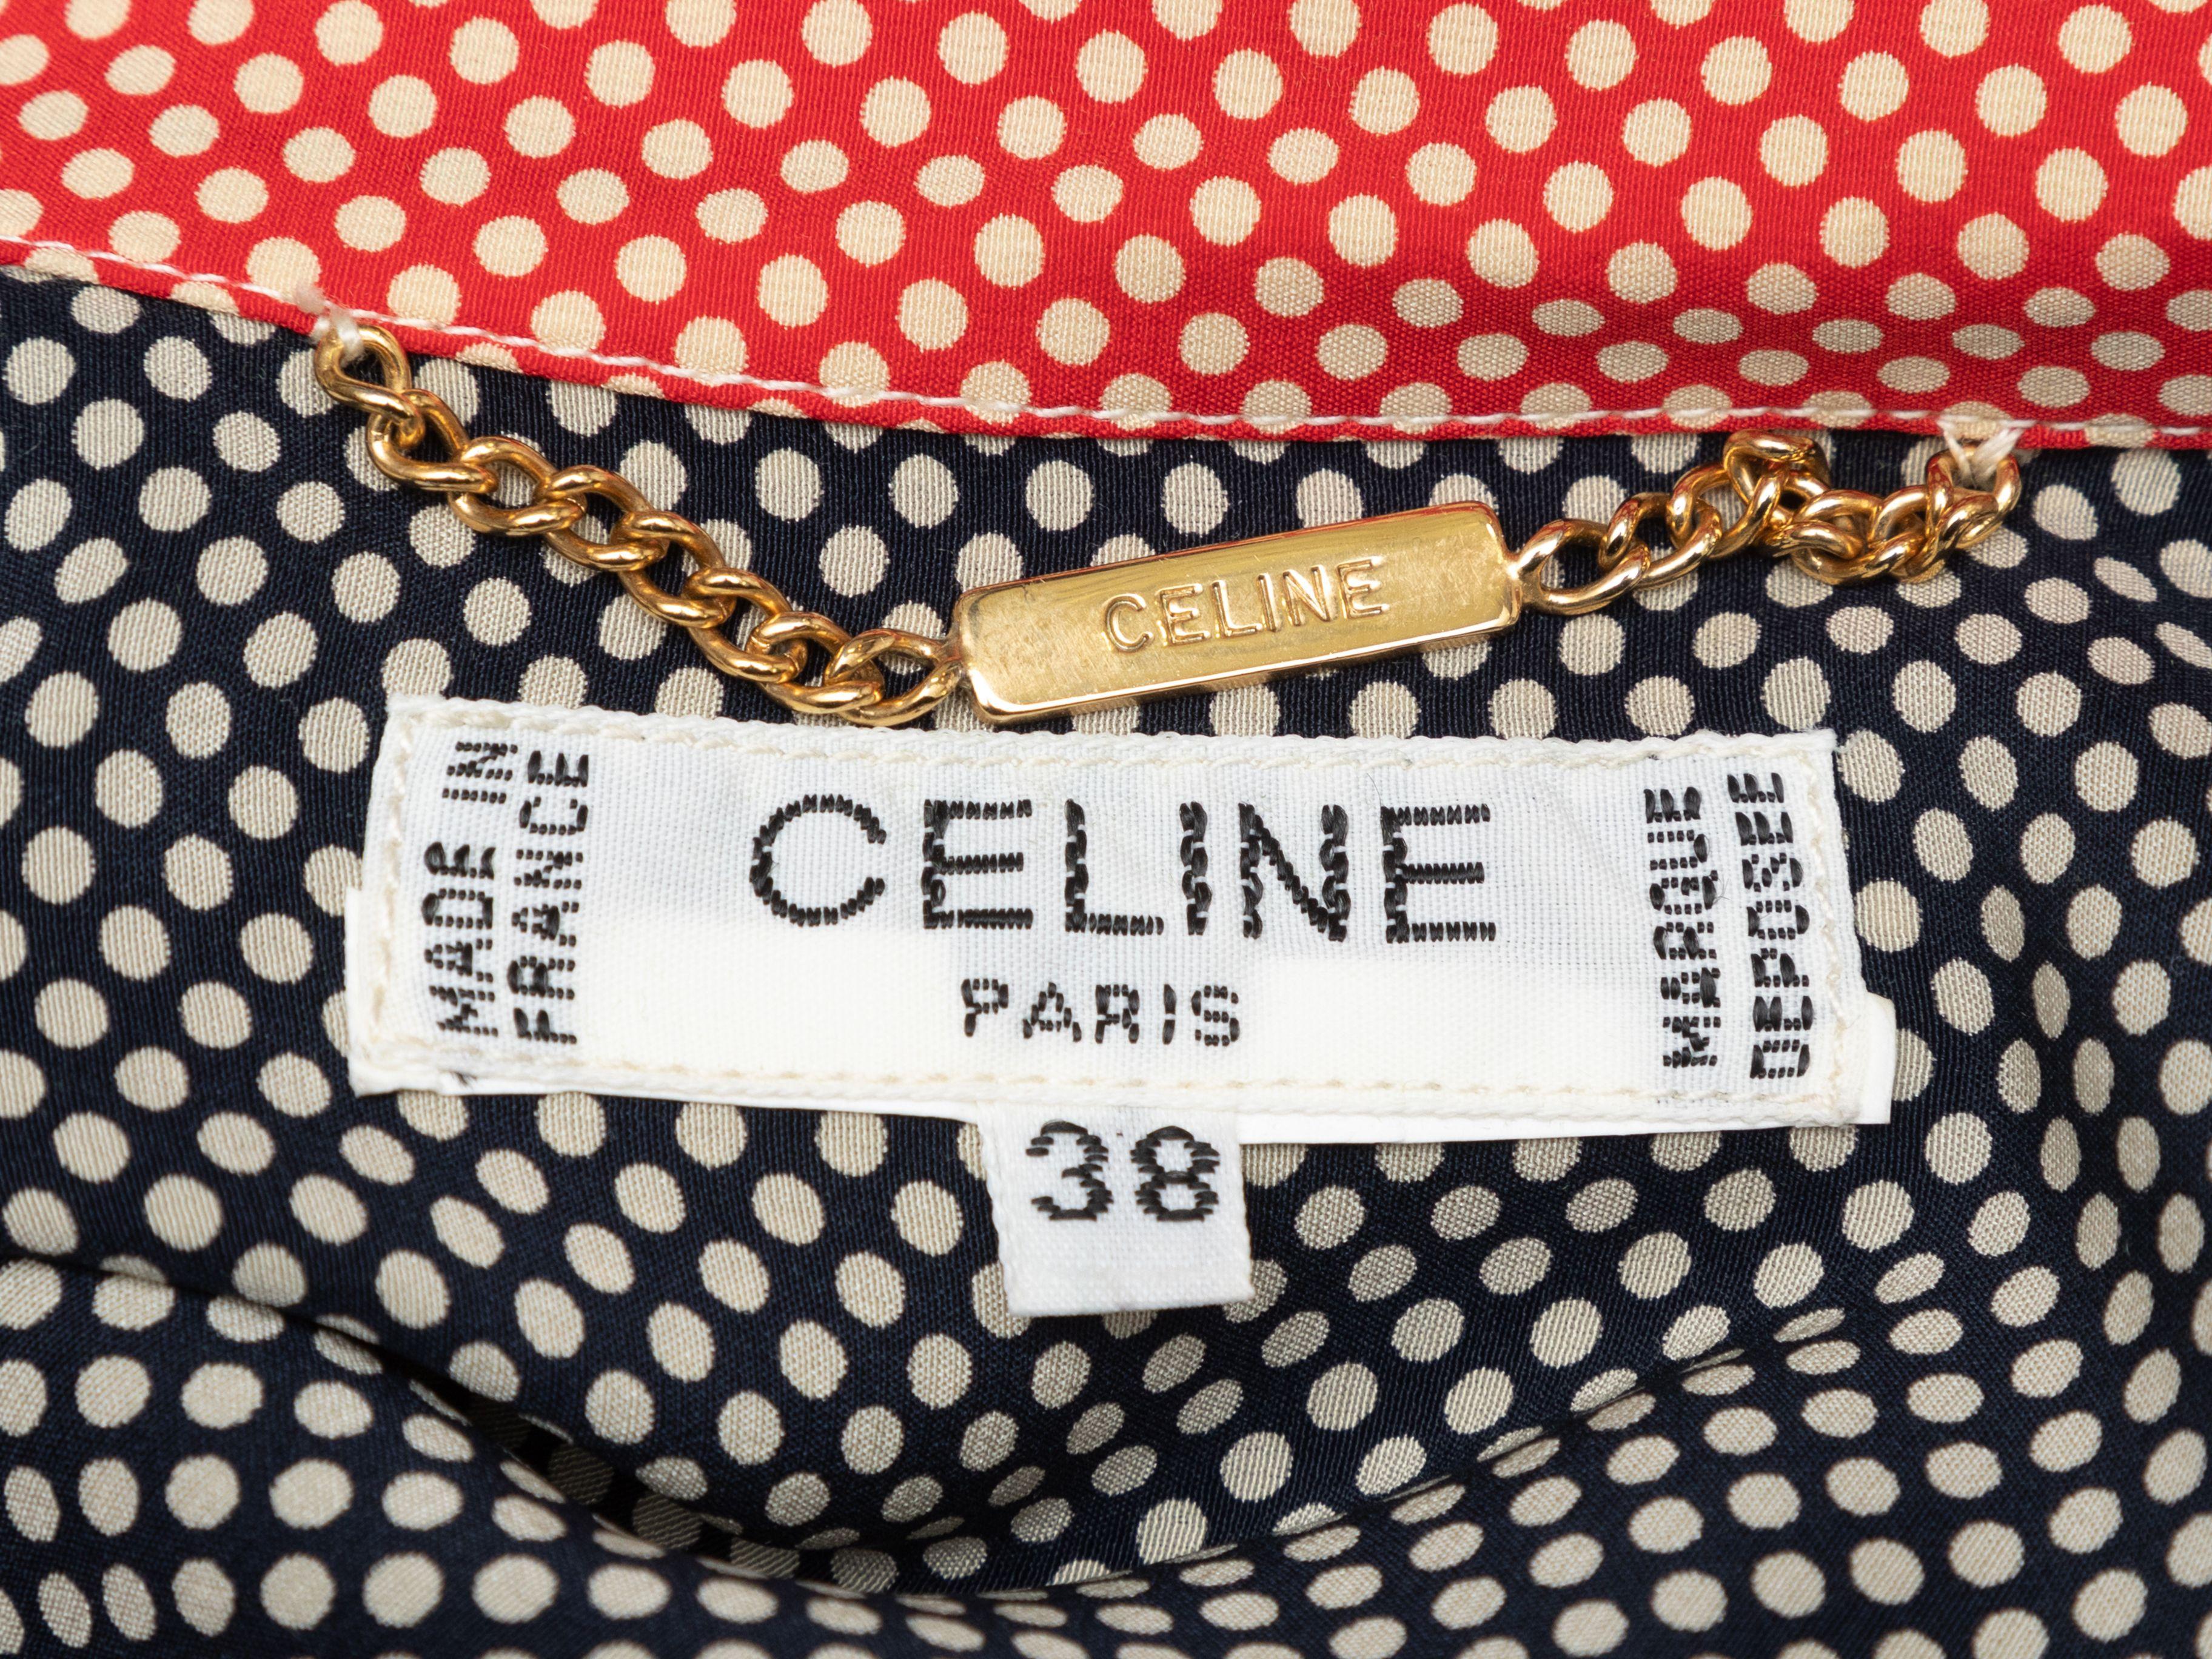 Product Details: Vintage navy, red, and white polka dot print dress by Celine. Pointed collar. V-neck. Short sleeves. Pleated skirt. Button closures at front bodice. 30